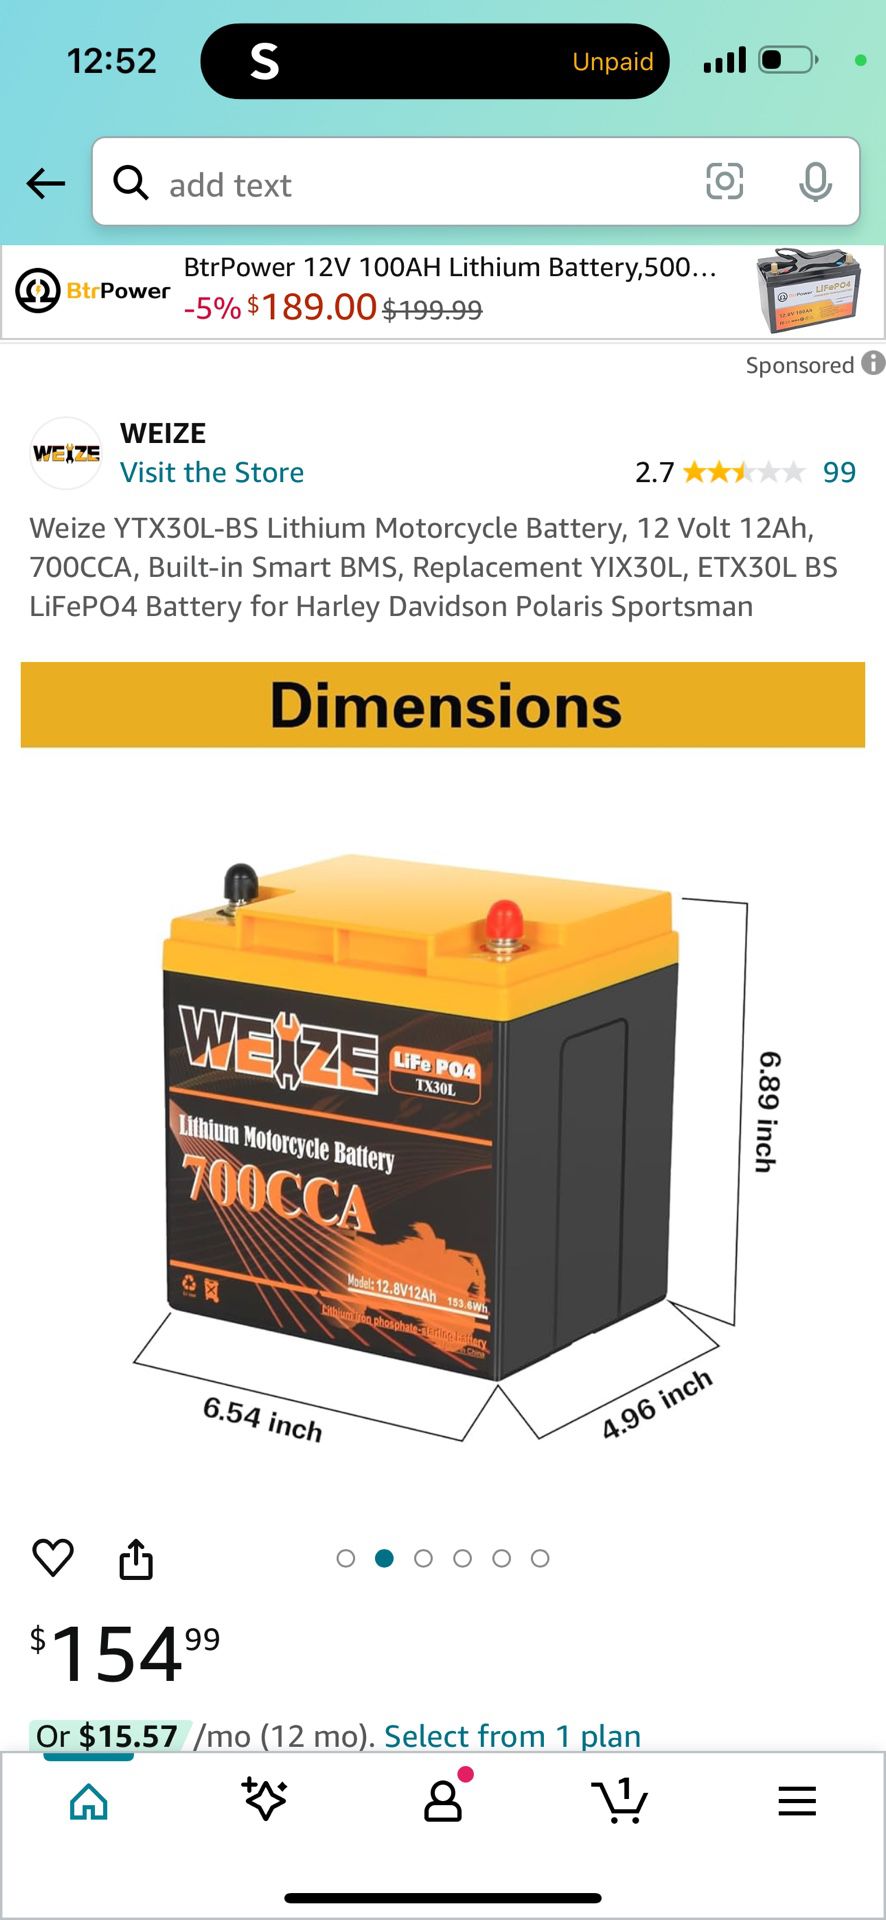 Weize YTX30L-BS Lithium Motorcycle Battery, 12 Volt 12Ah, 700CCA, Built-in Smart BMS, Replacement YIX30L, ETX30L BS LiFePO4 Battery for Harley Davidso